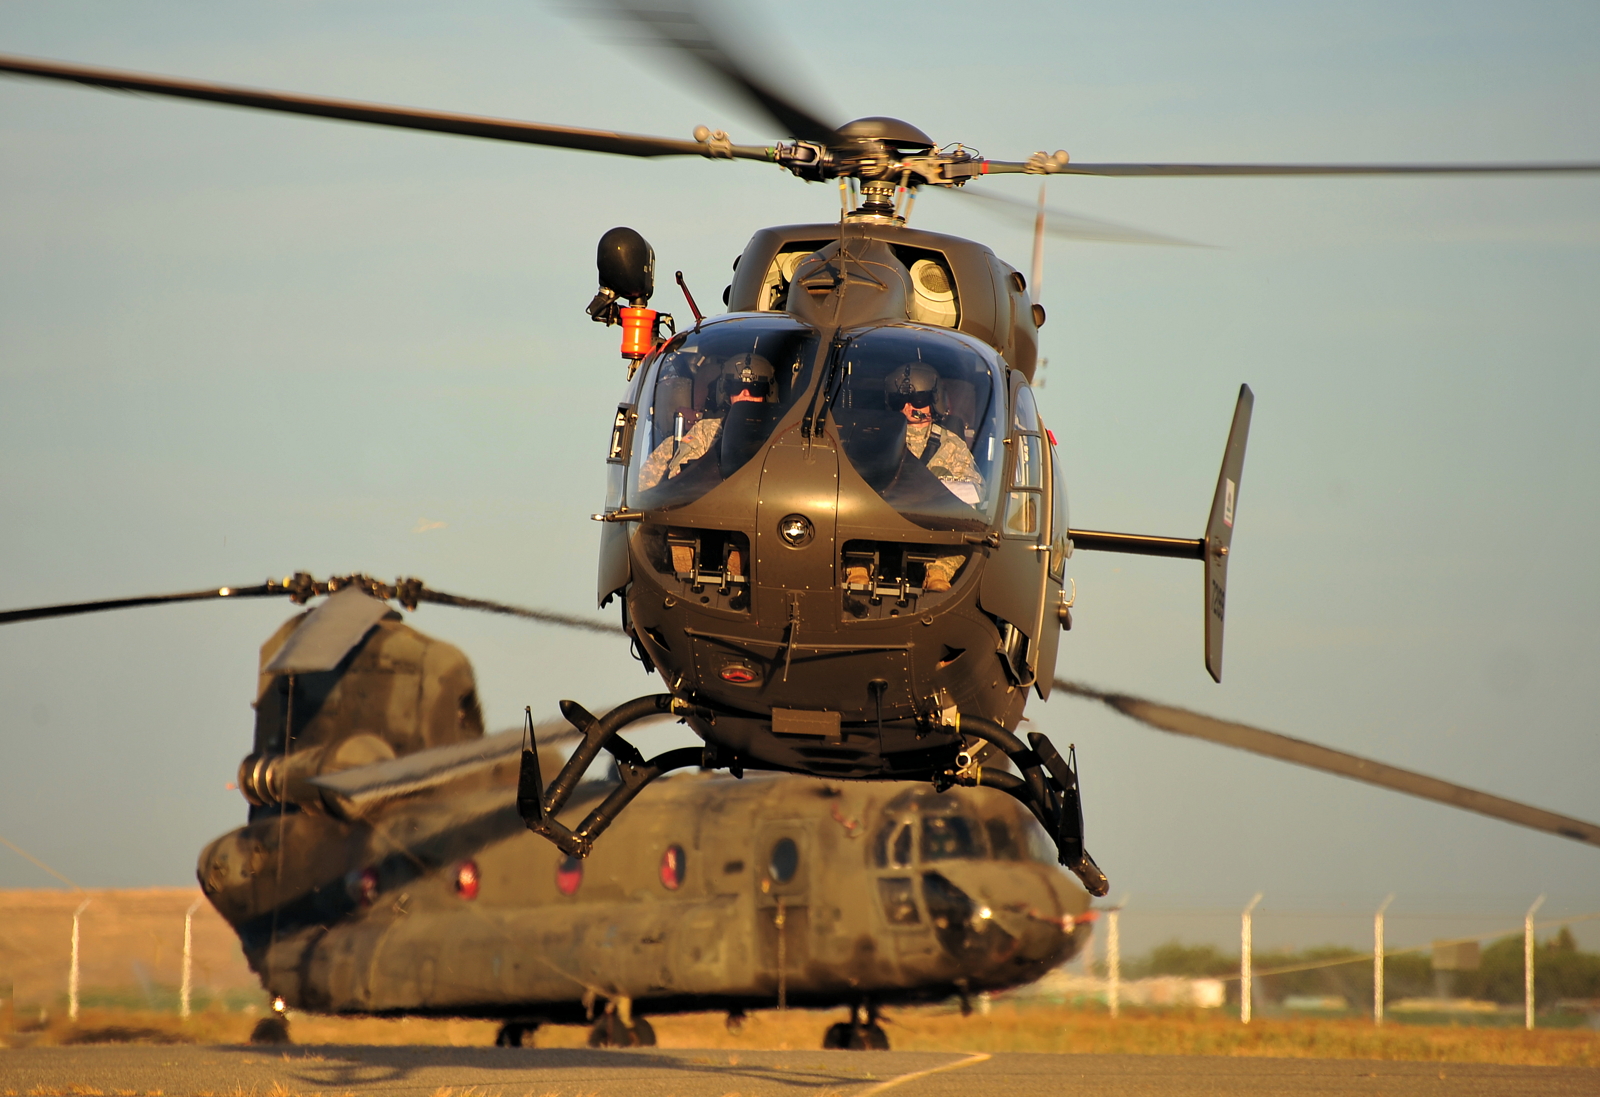 The Army has already ordered 412 UH-72A helicopters from Airbus, and has identified a need for more than 100 additional Lakotas. Skip Robinson Photo